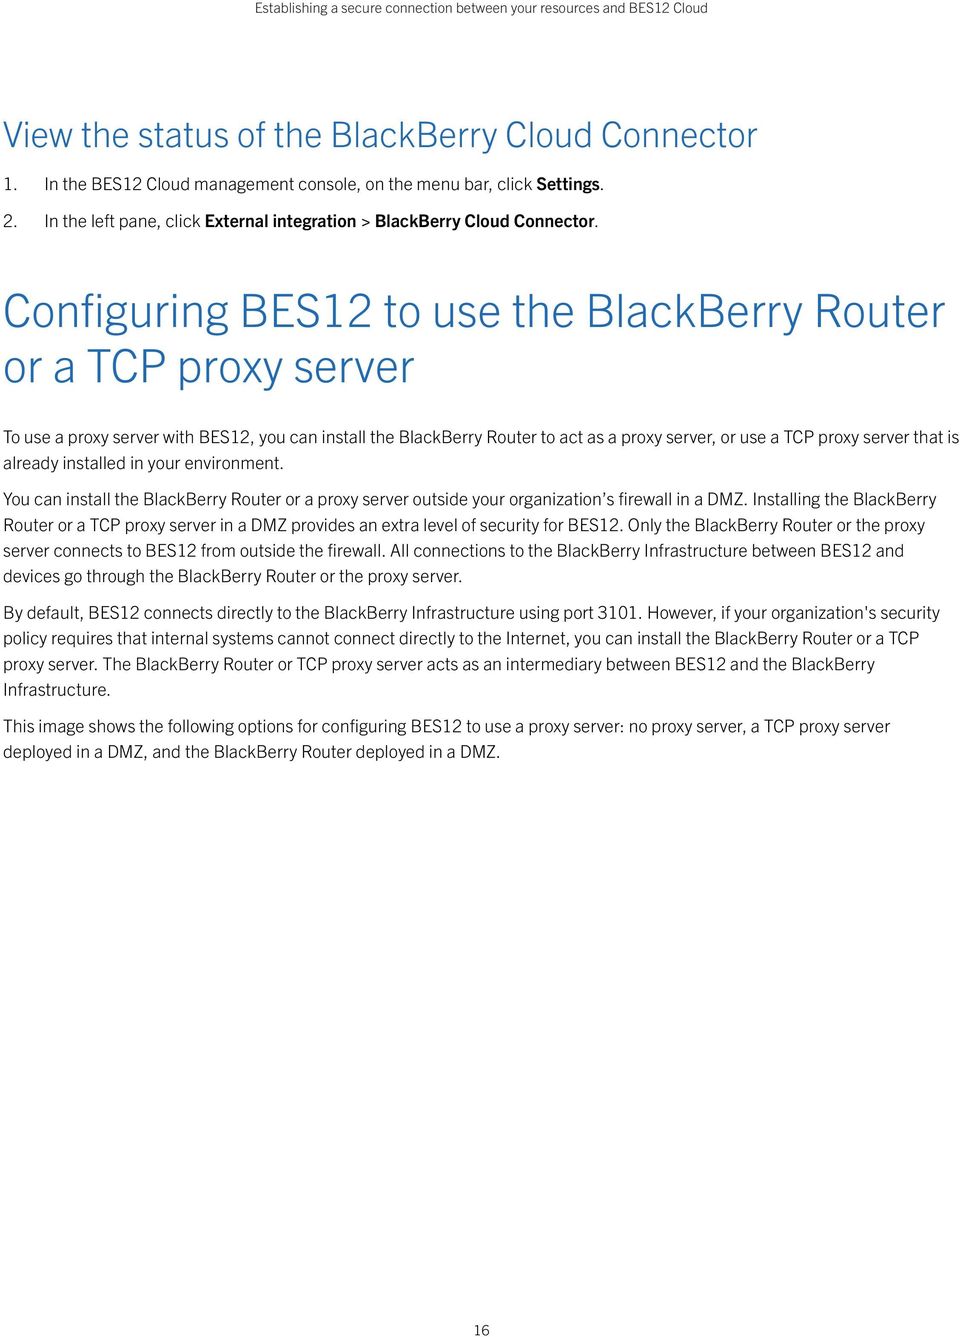 Configuring BES12 to use the BlackBerry Router or a TCP proxy server To use a proxy server with BES12, you can install the BlackBerry Router to act as a proxy server, or use a TCP proxy server that